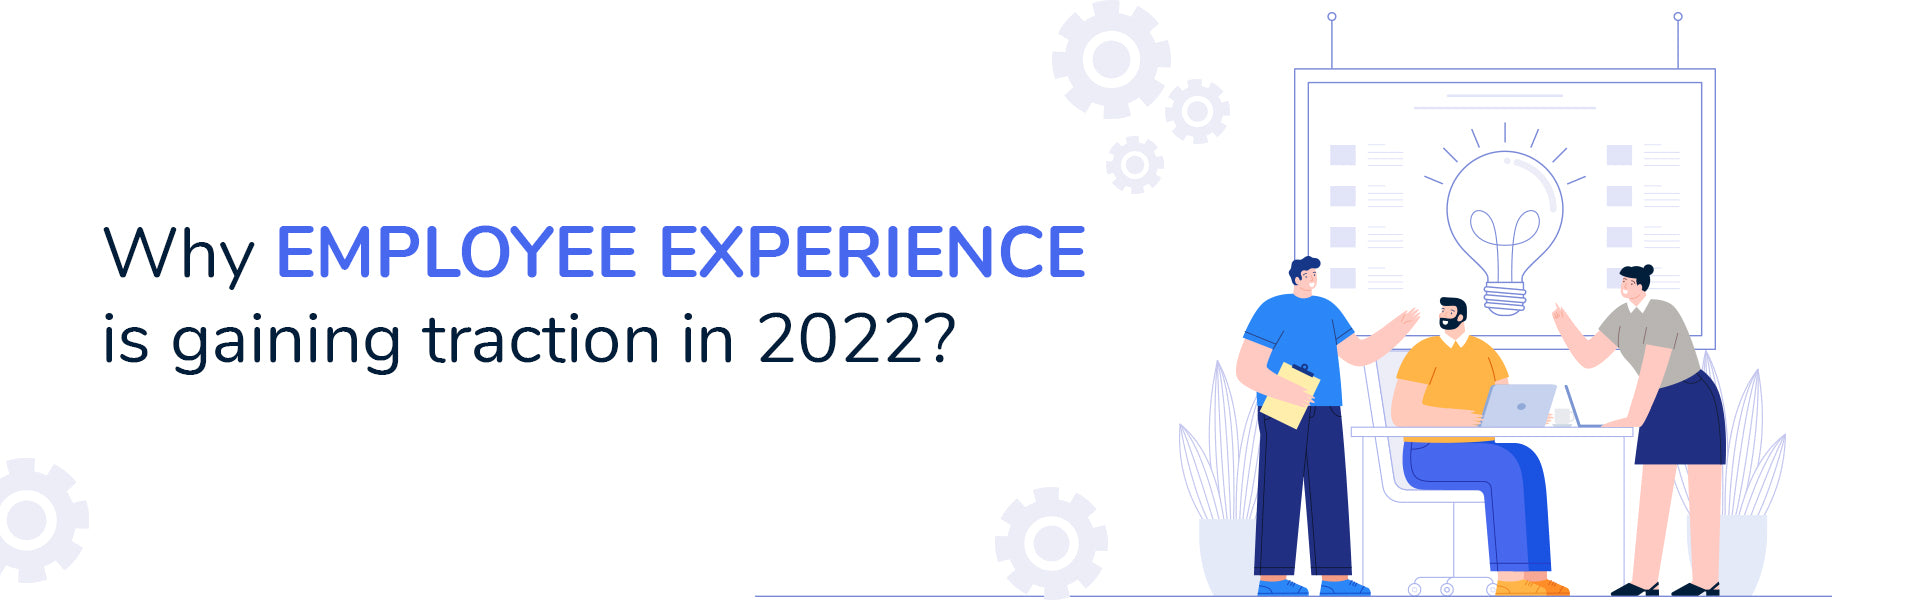 Why is employee experience gaining traction in 2022?